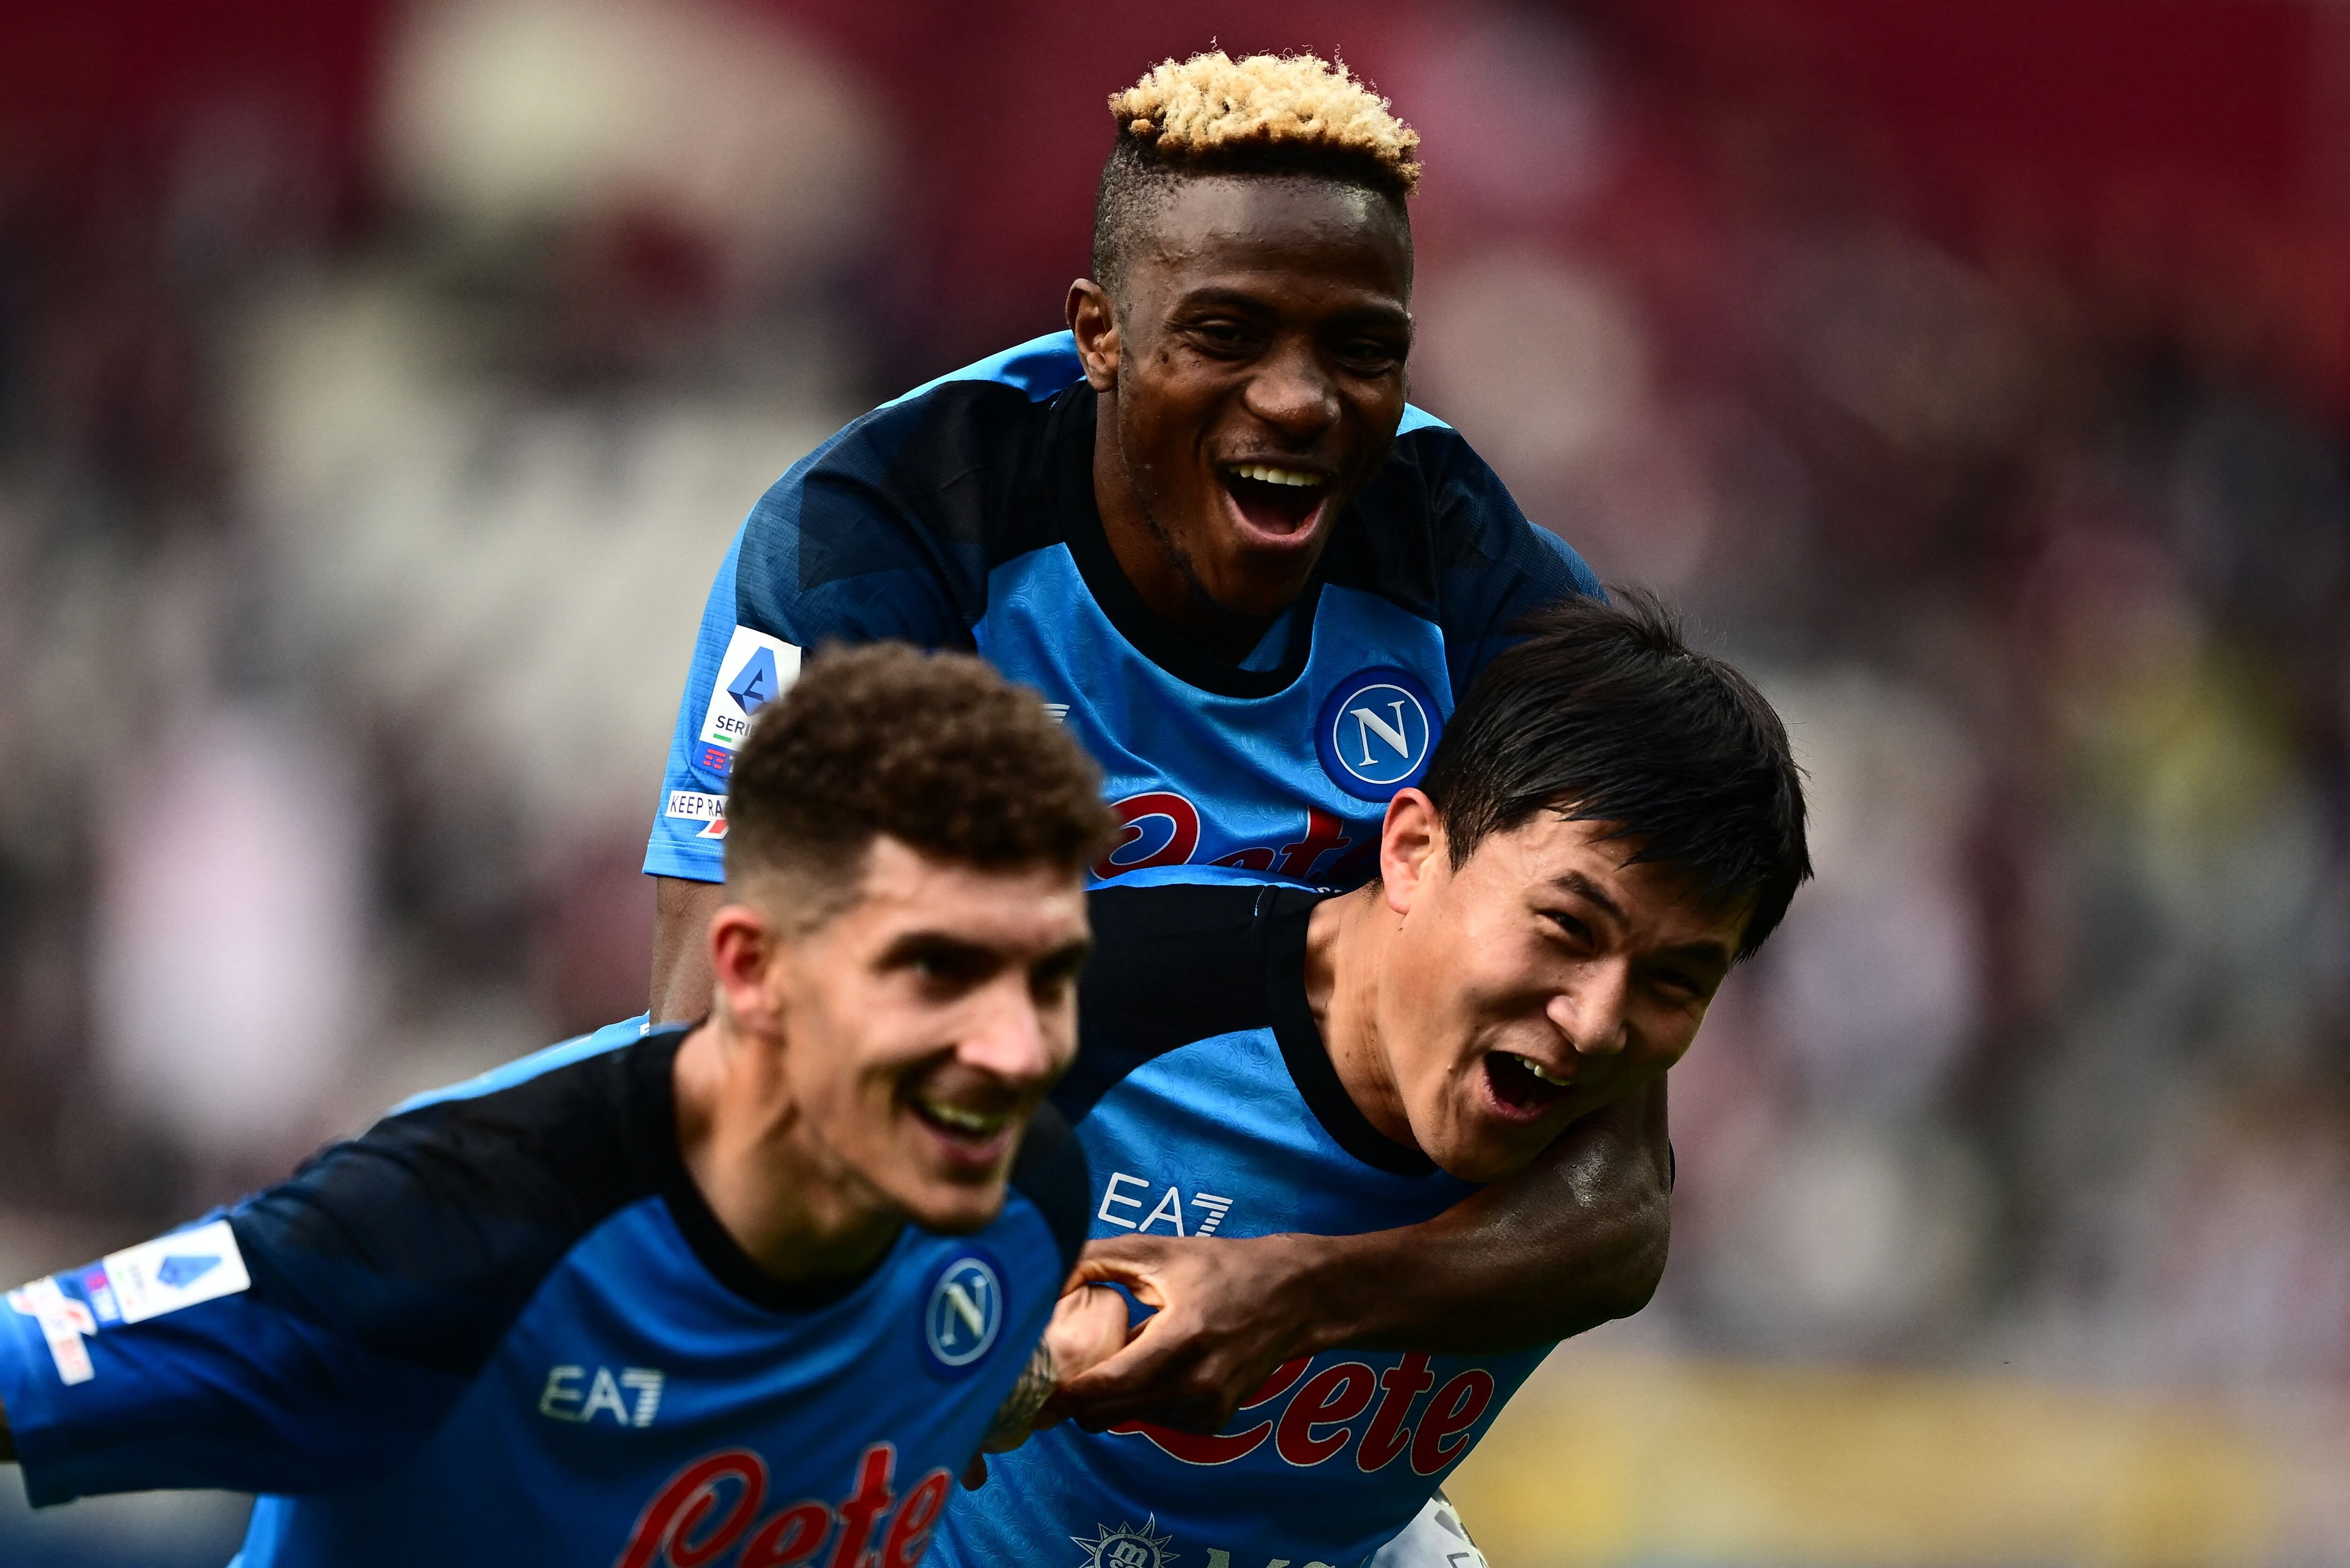 Napoli's South Korean defender Min-jae Kim (R) carries Napoli's Nigerian forward Victor Osimhen as they celebrate with Napoli's Italian defender Giovanni Di Lorenzo at the end of the Italian Serie A football match between Torino and Napoli on March 19, 2023 at the Olympic stadium in Turin. (Photo by Marco BERTORELLO / AFP)